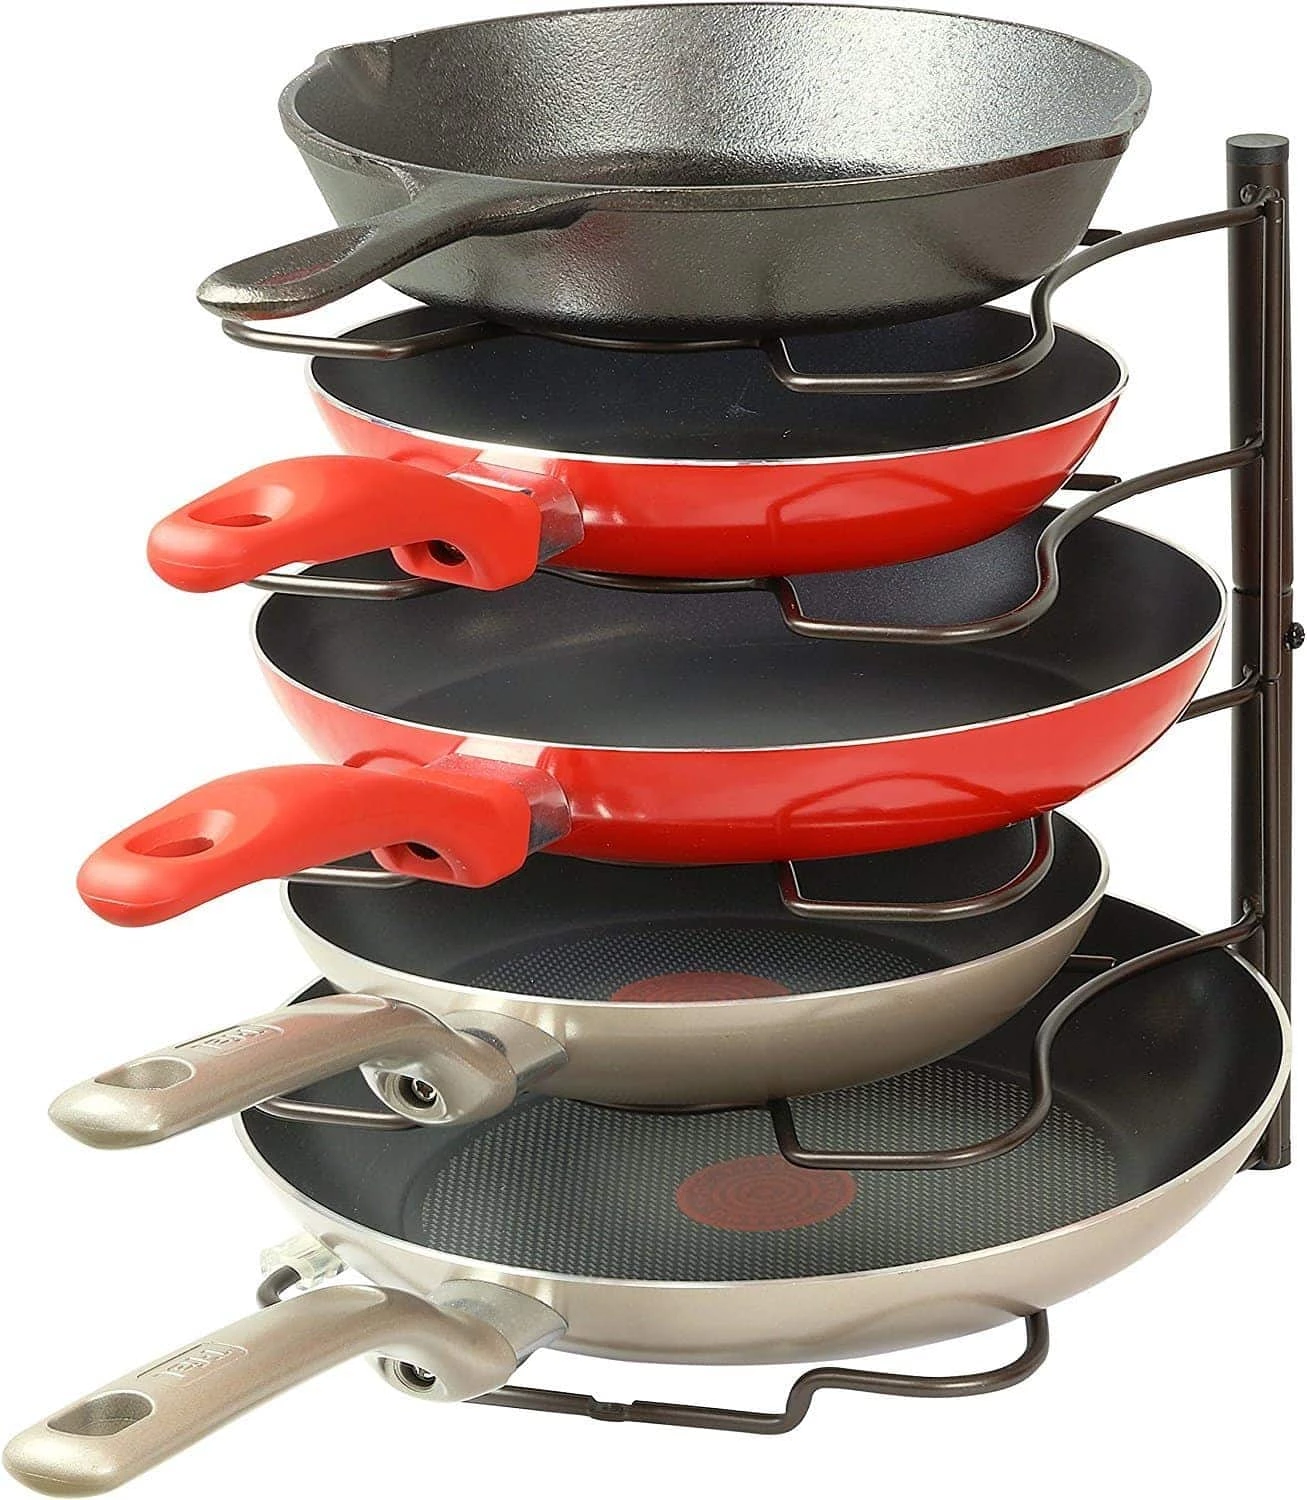 How to Organize your Pots and Pans - Make your cabinet space more efficient with these tips - In cabinet pot rack